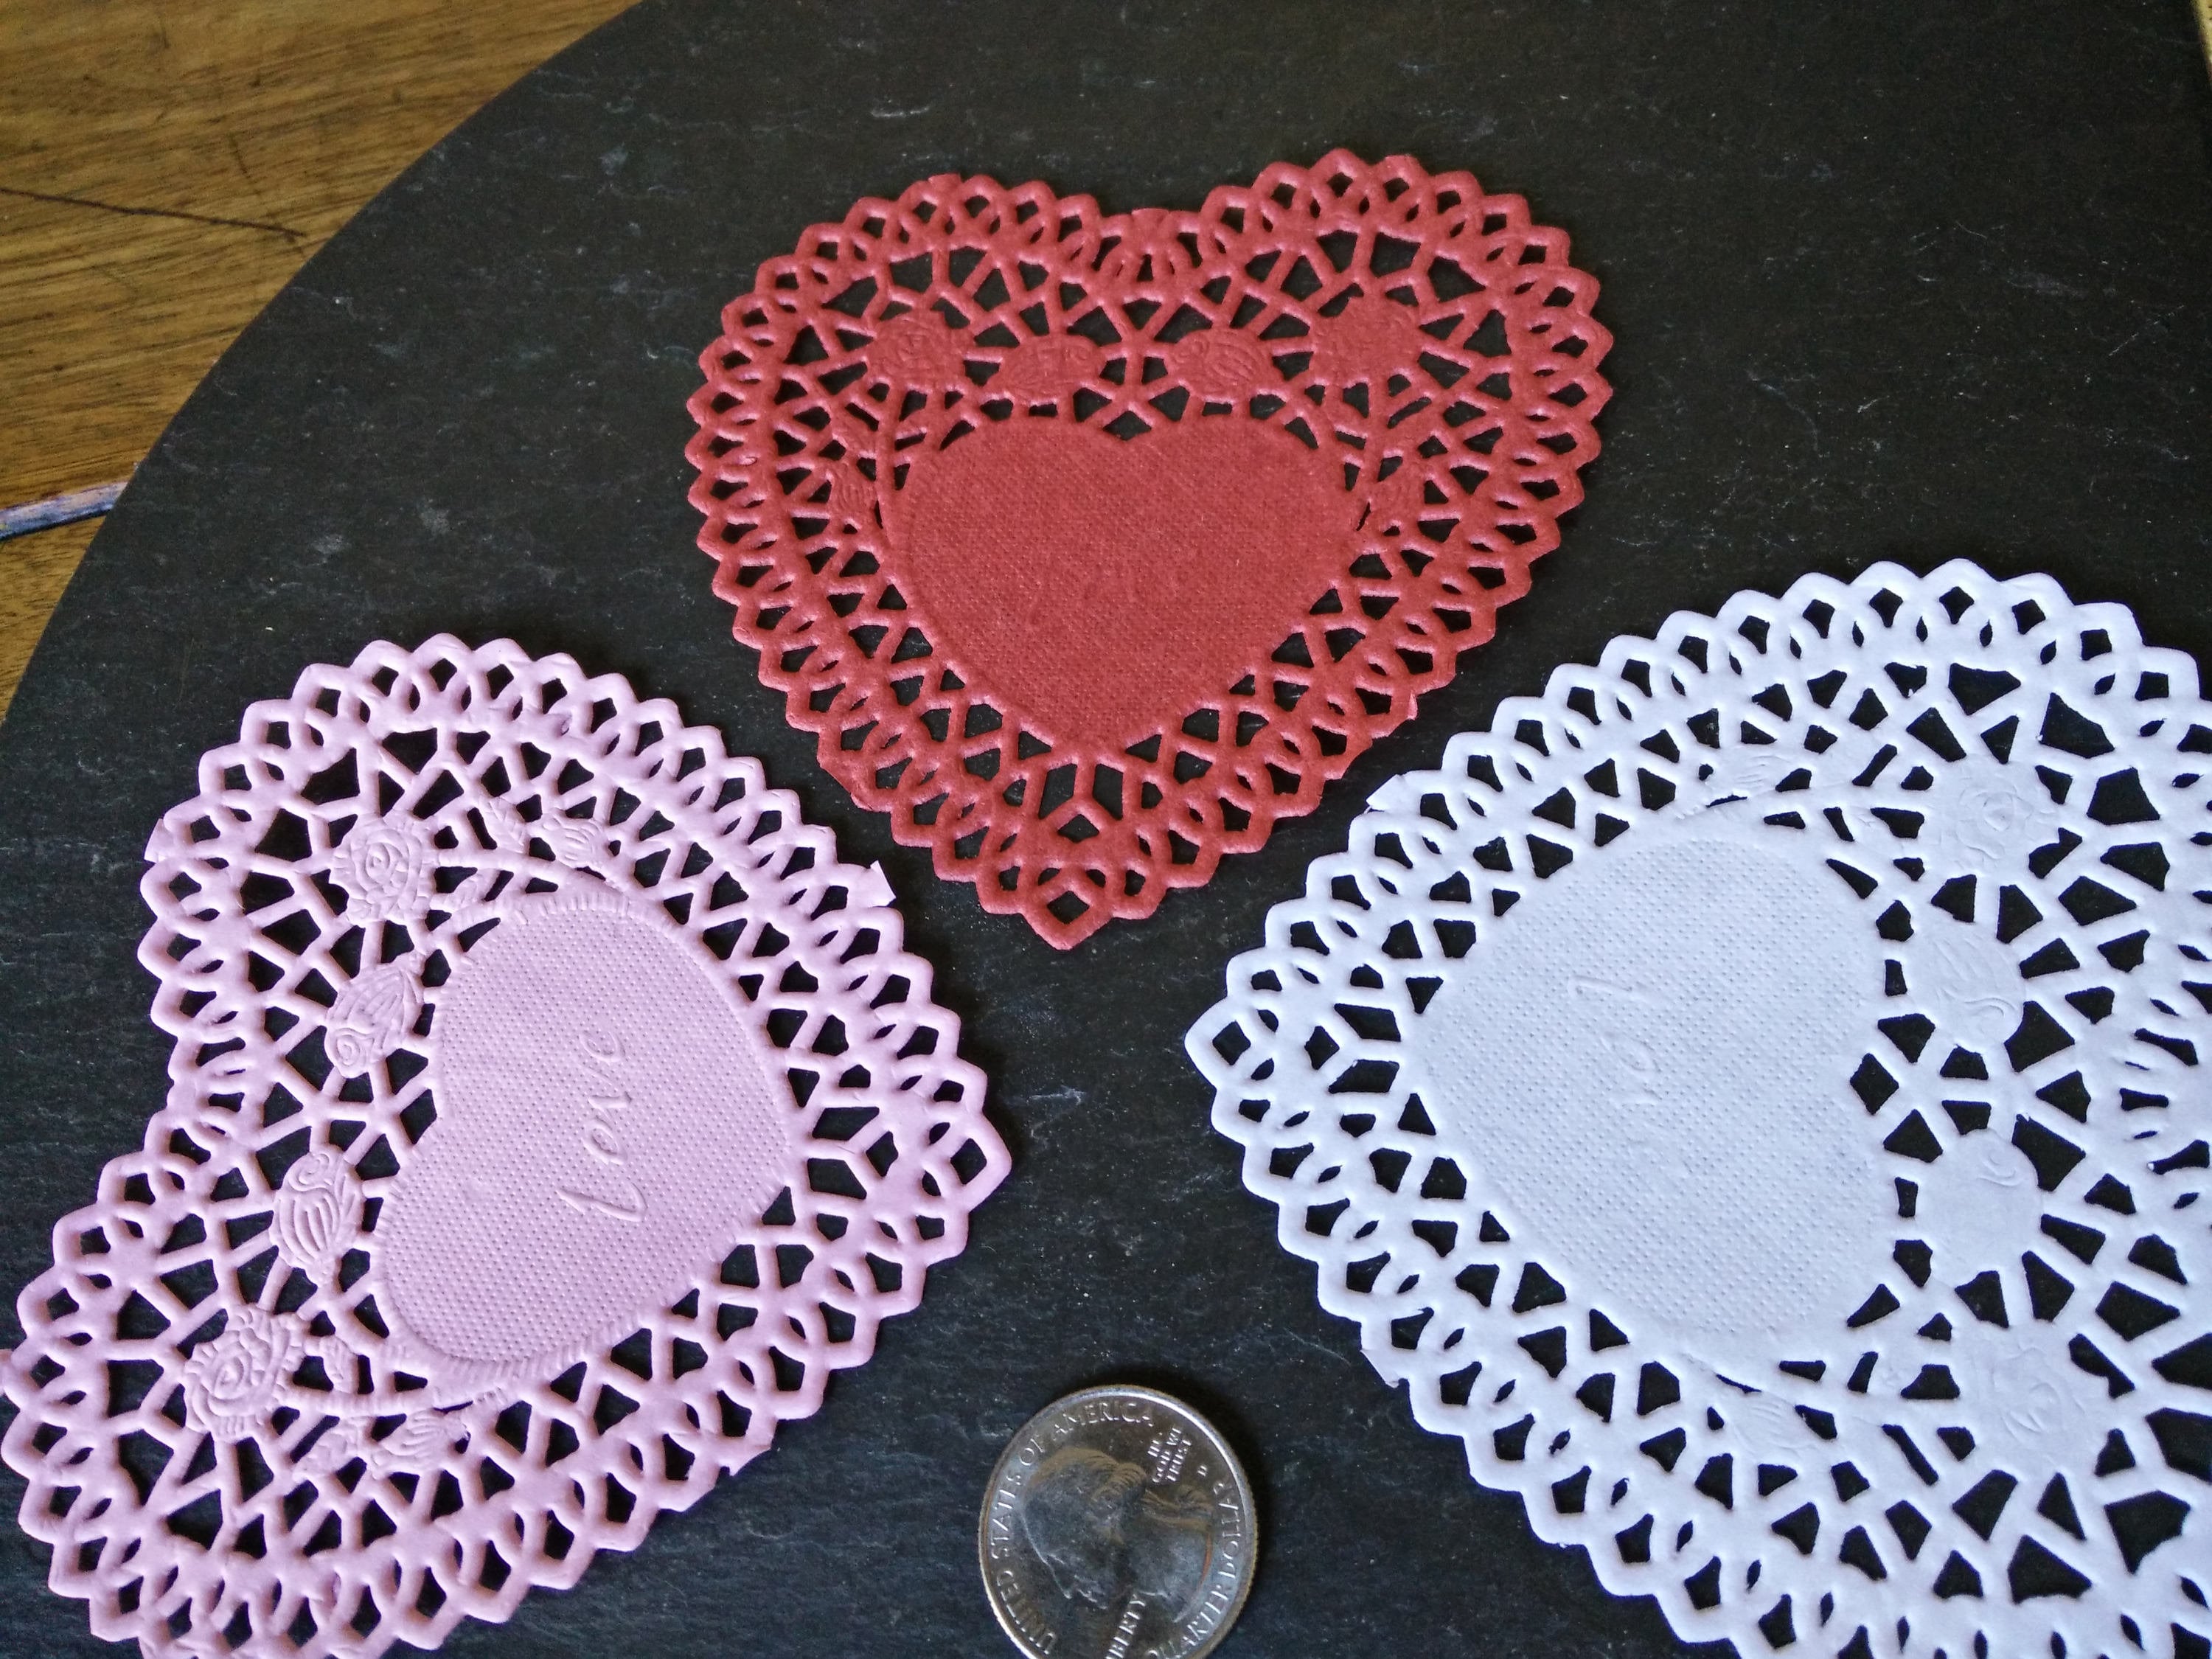 JOYIN Valentines Day Craft Gift Set with 100 Heart Doilies, 24 Pieces Foam Hearts and 2 Bags of Foam Heart Stickers